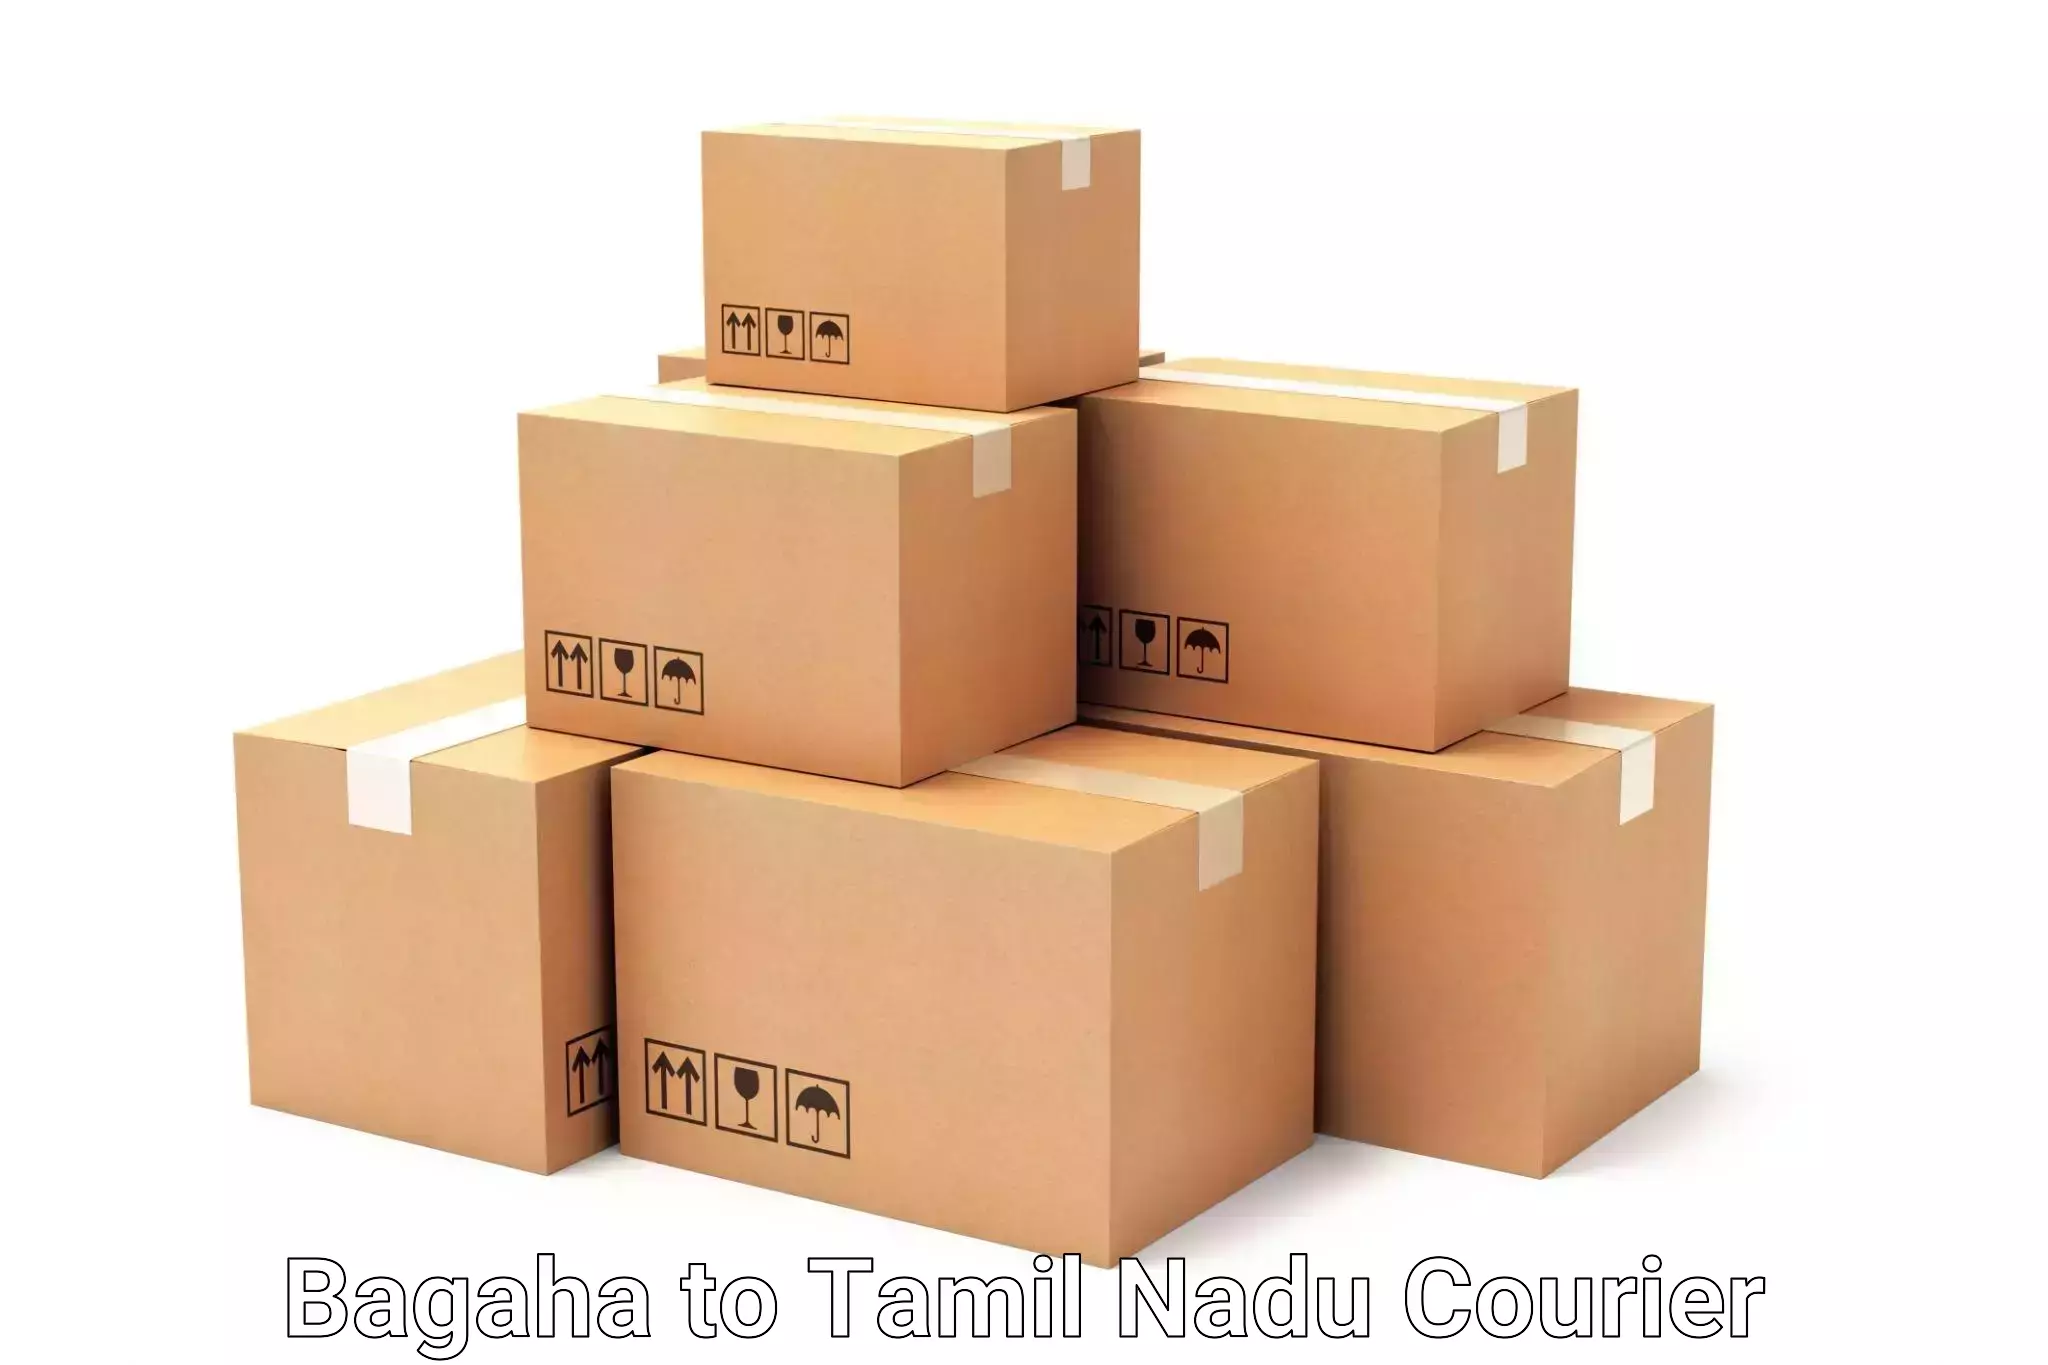 Personal effects shipping Bagaha to Chennai Port